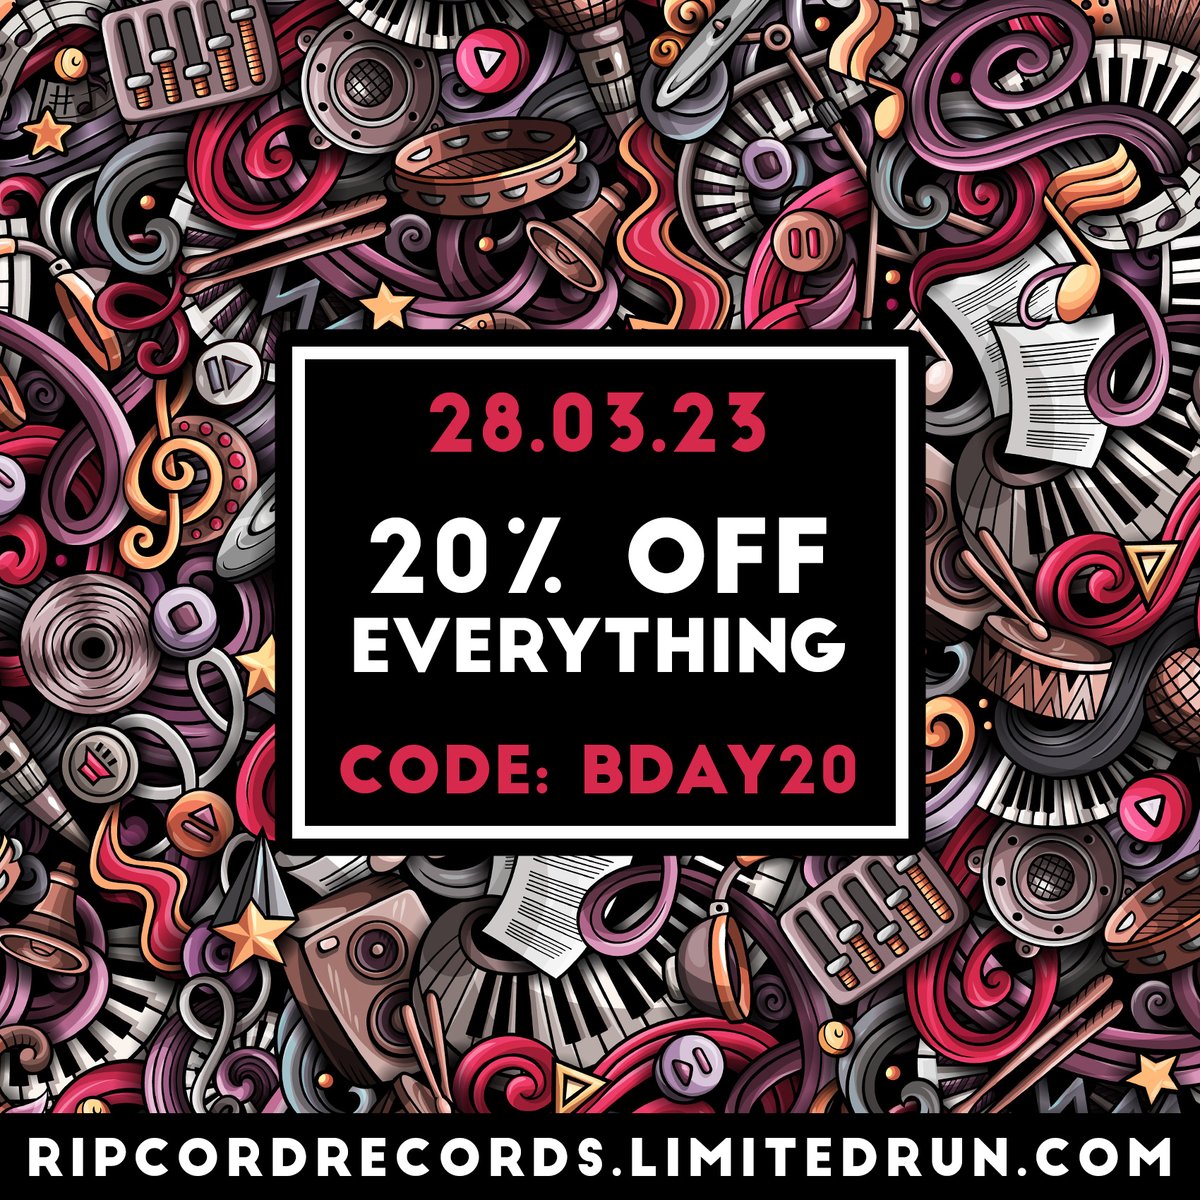 It was my birthday at the weekend and I meant to put a sale up but forgot. This will last until midnight tonight (Tues, 28th March). The code will work on everything, even preorders. You can use it on our bandcamp too! Tell your friends!